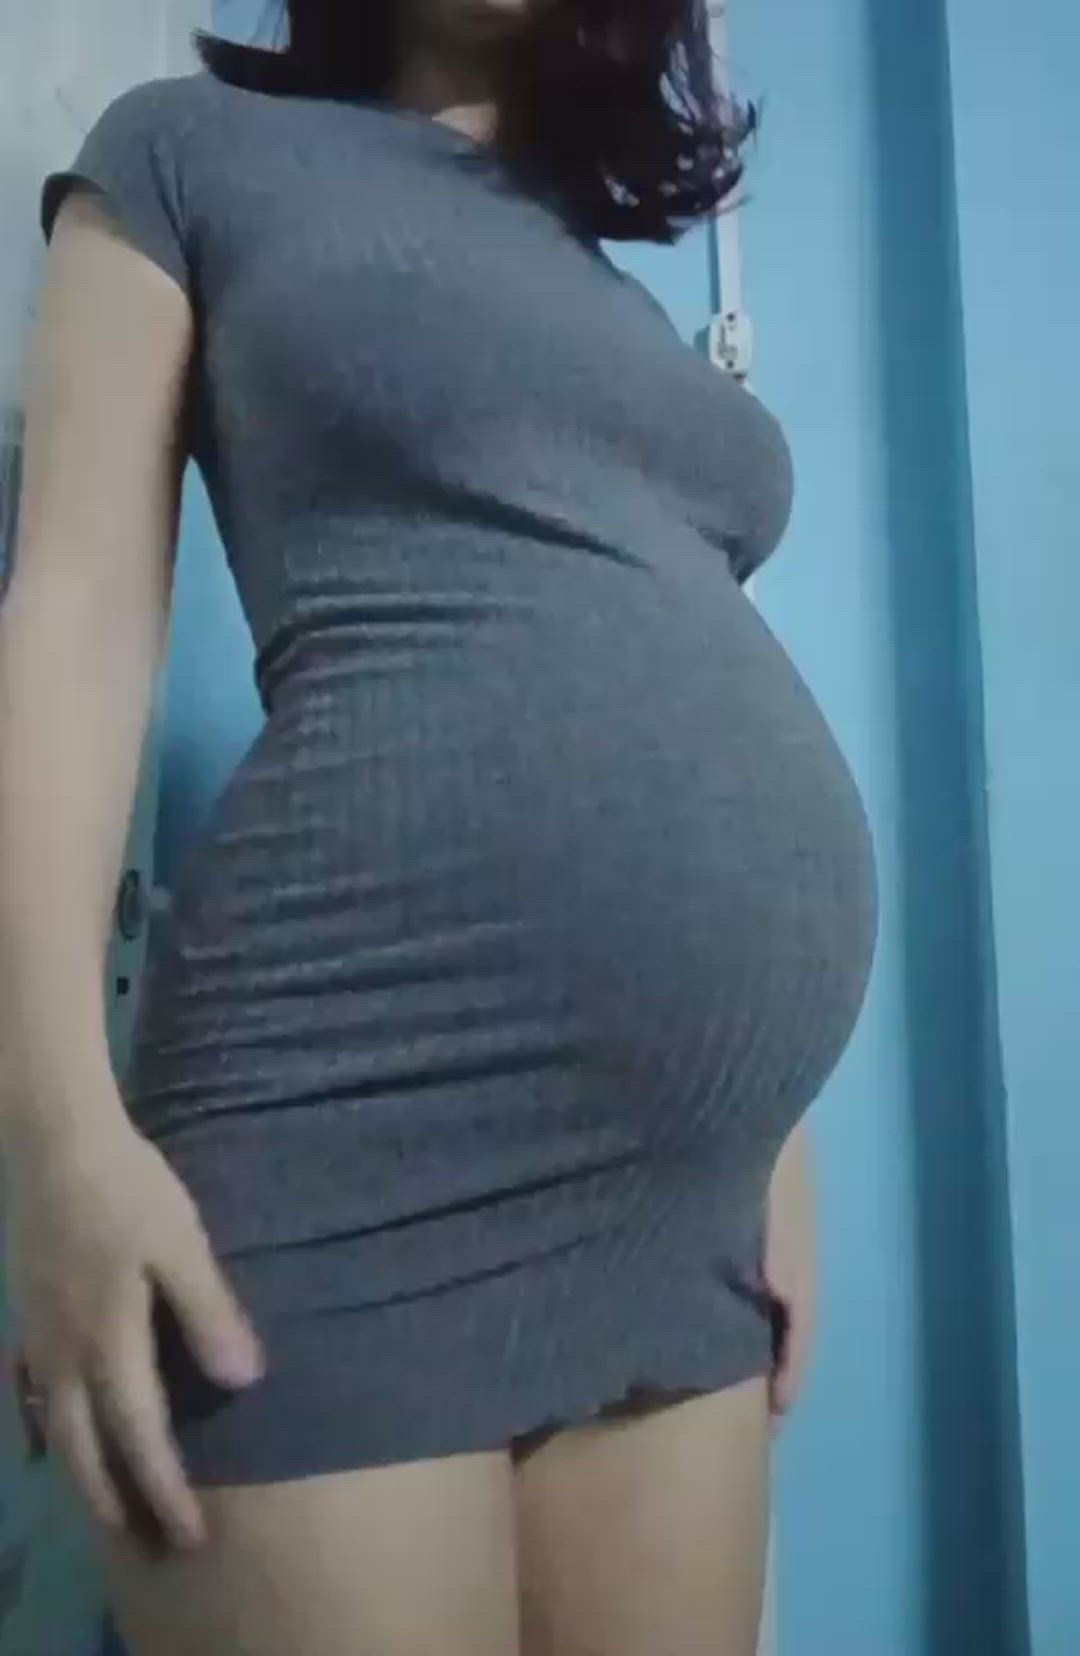 Pregnant porn video with onlyfans model sharon7 <strong>@sharon_i</strong>